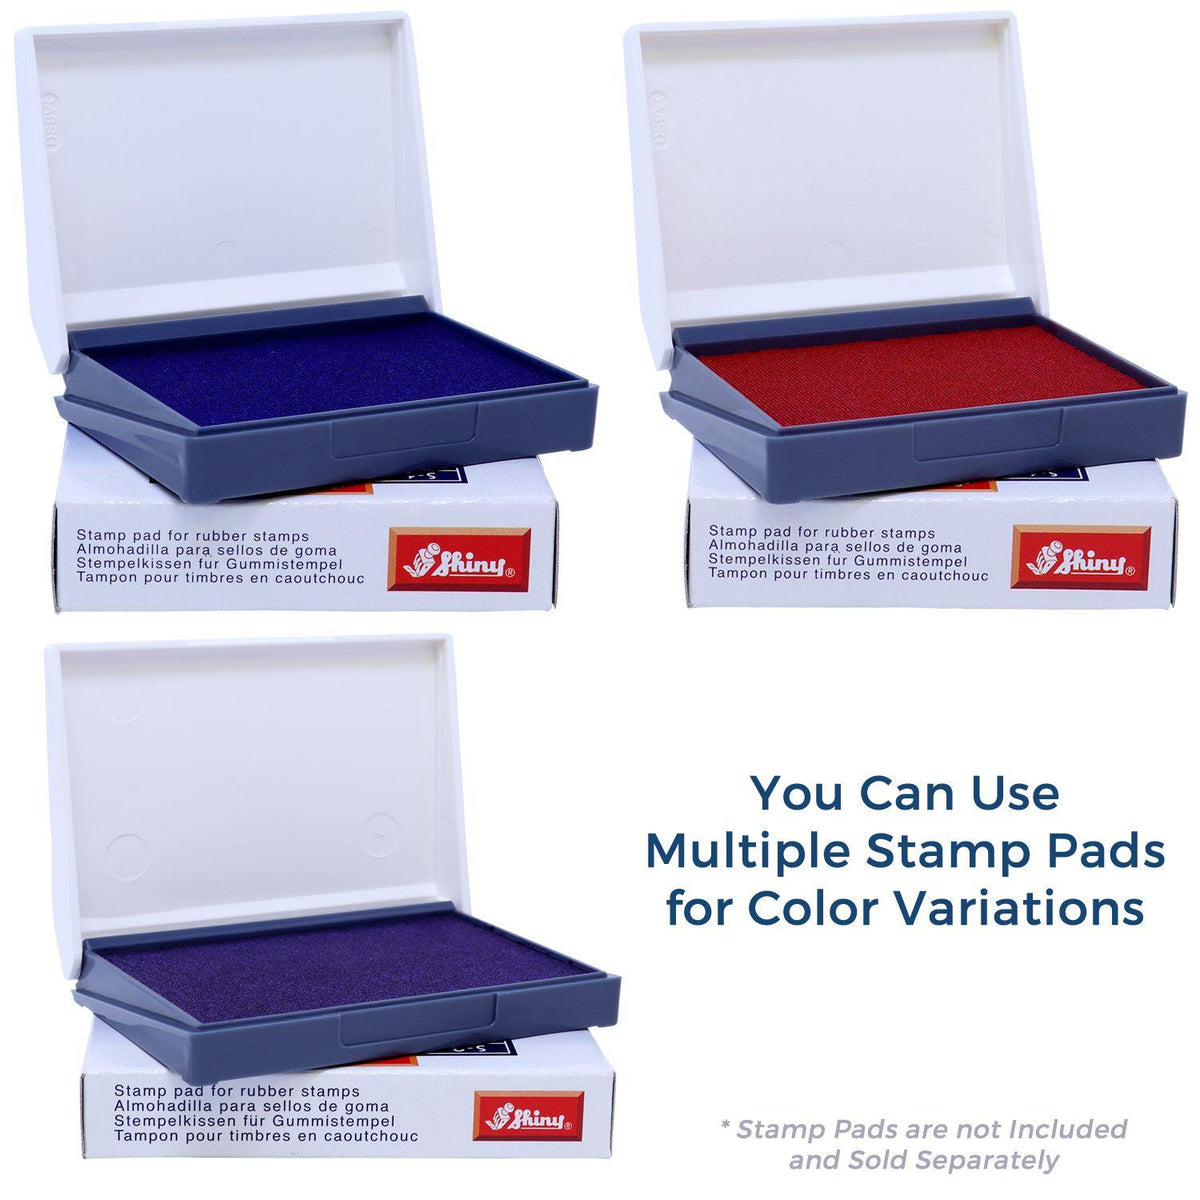 Stamp Pads for Confidential Rubber Stamp Available